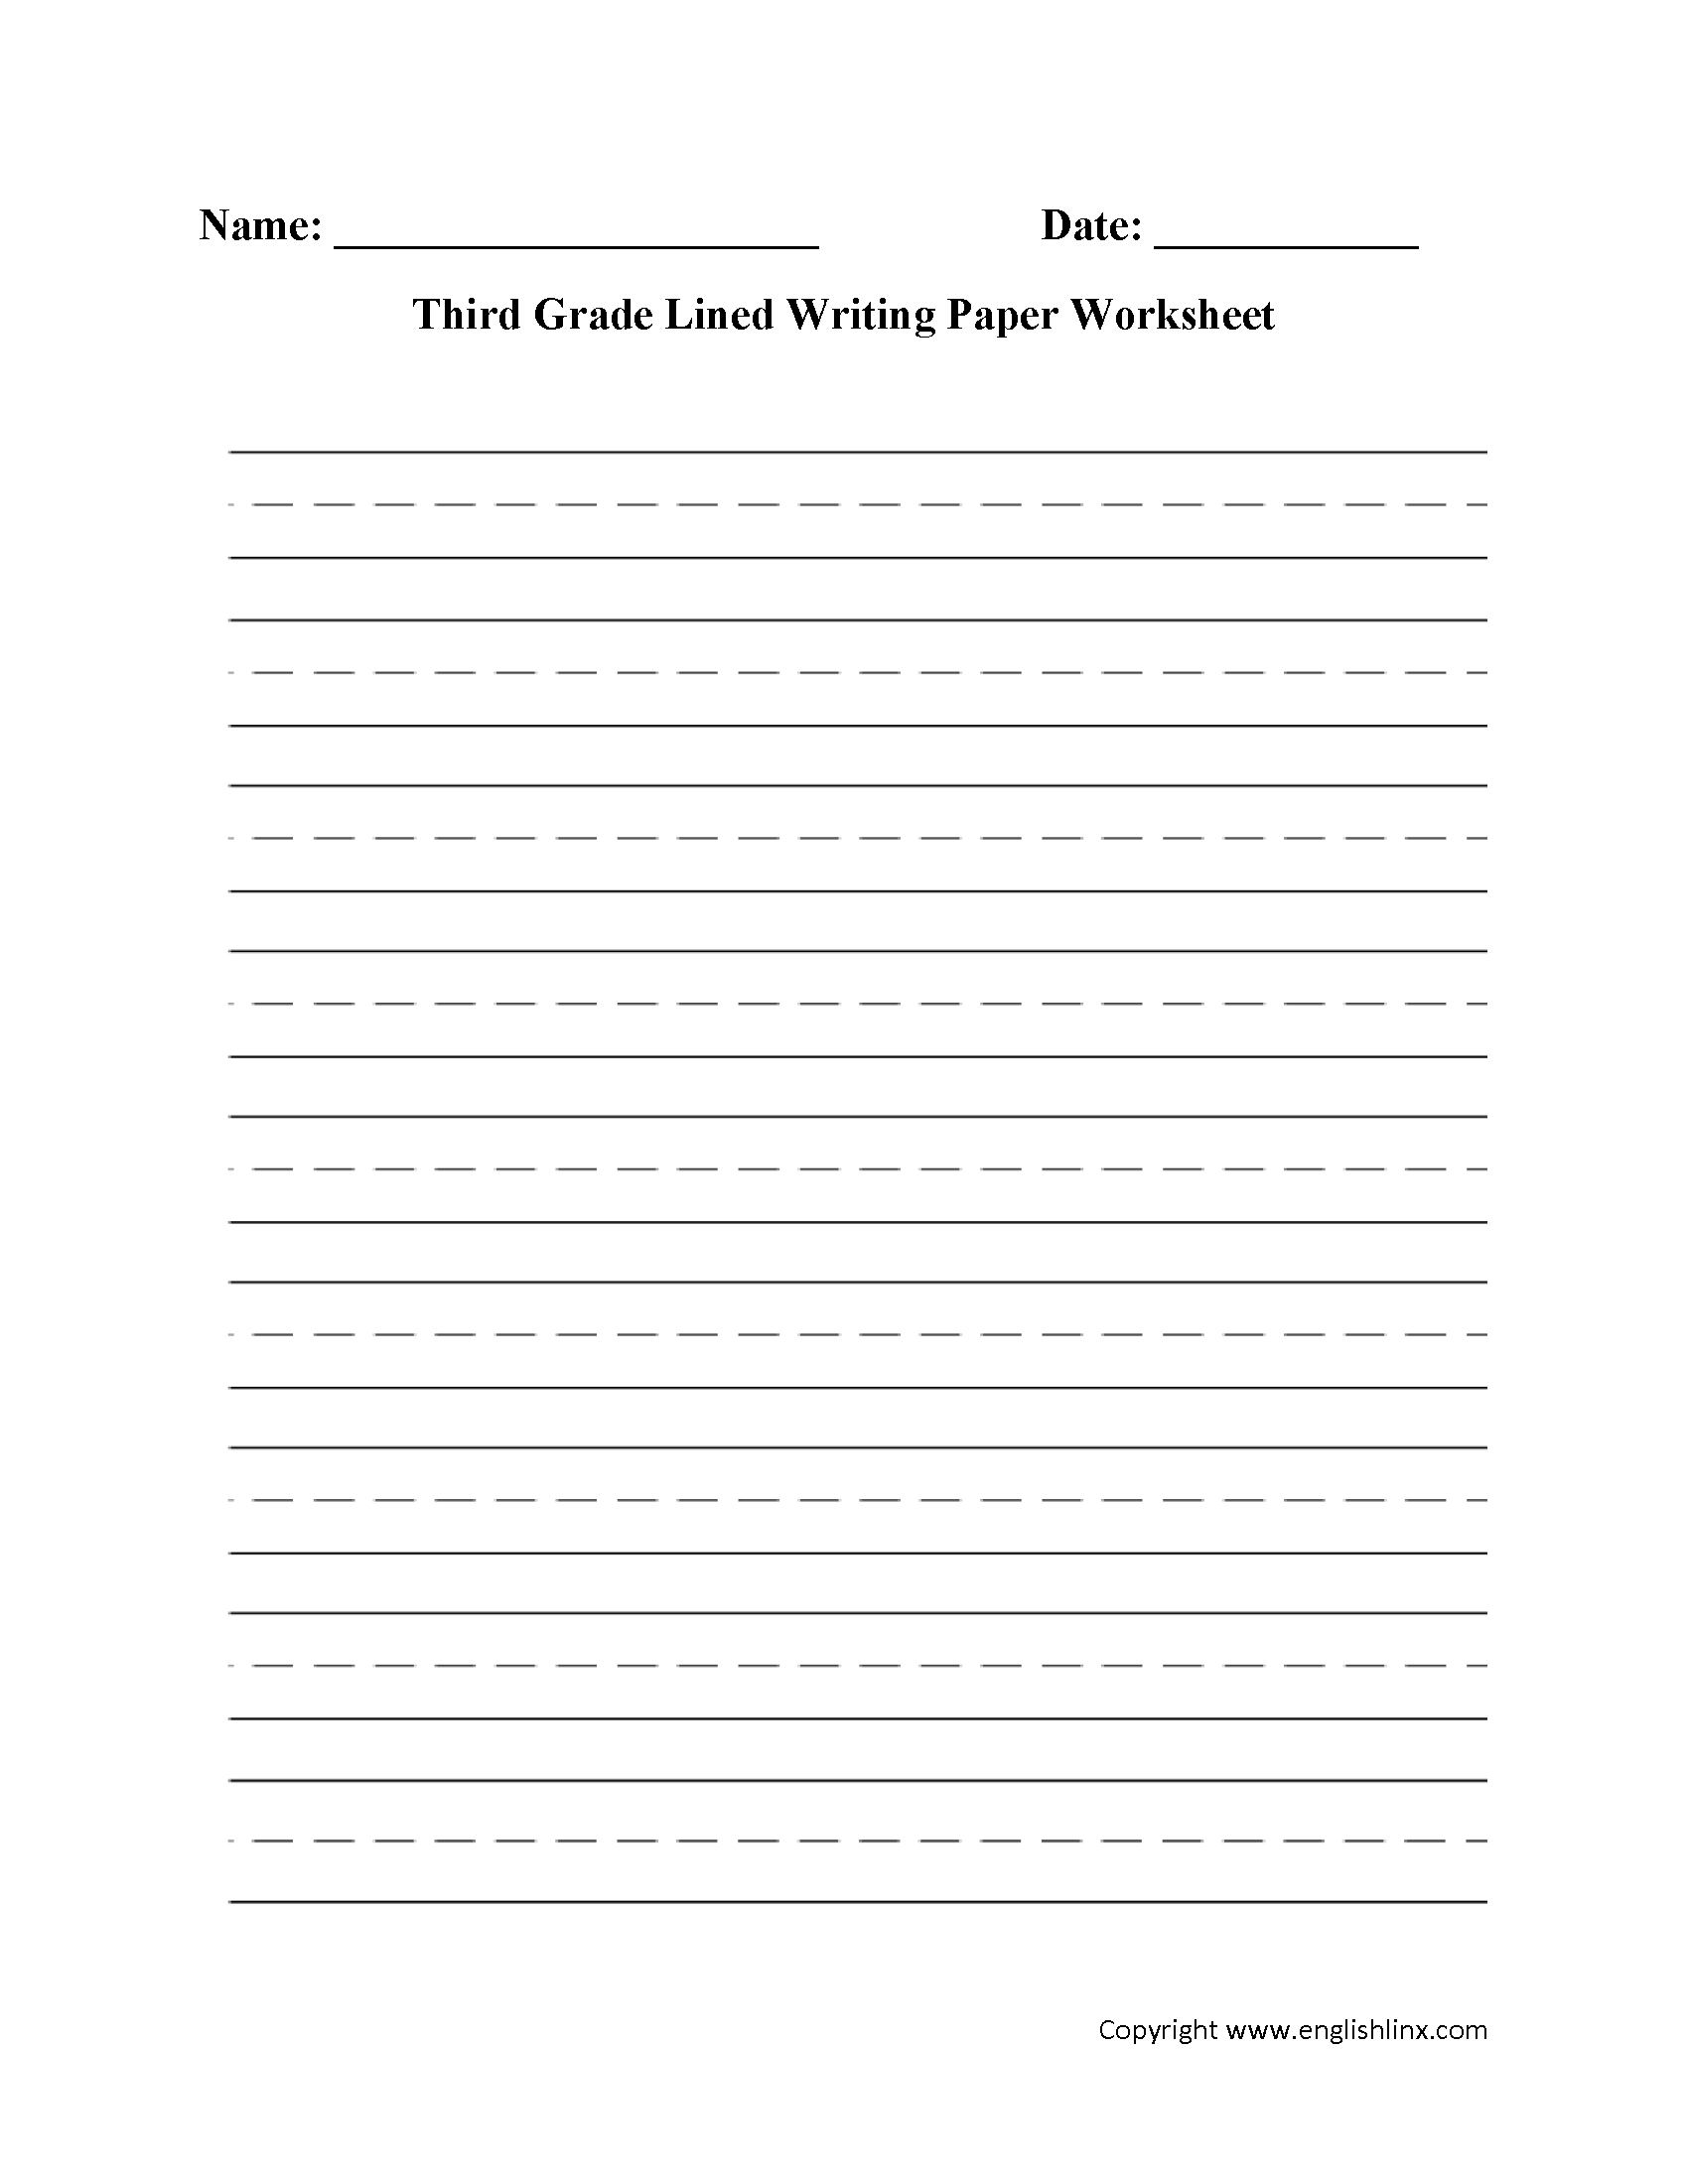 Writing Worksheets | Lined Writing Paper Worksheets - Free Printable Writing Pages